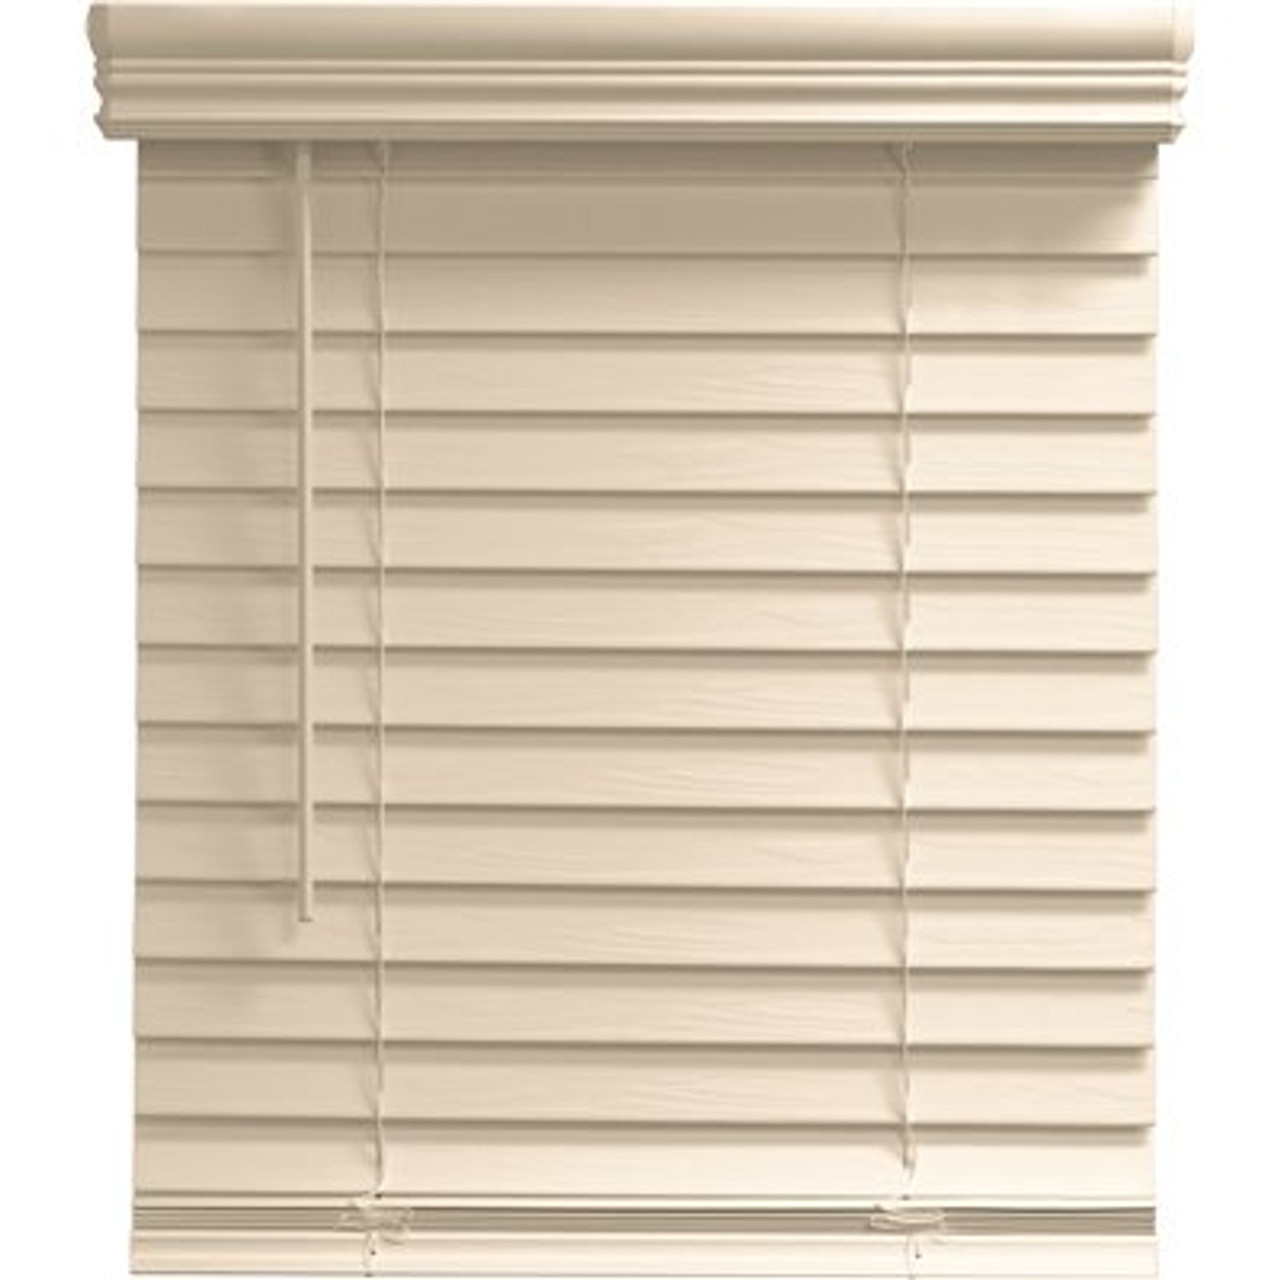 Champion TruTouch 23x72" Cordless 2" Faux Wood Blind Alabaster